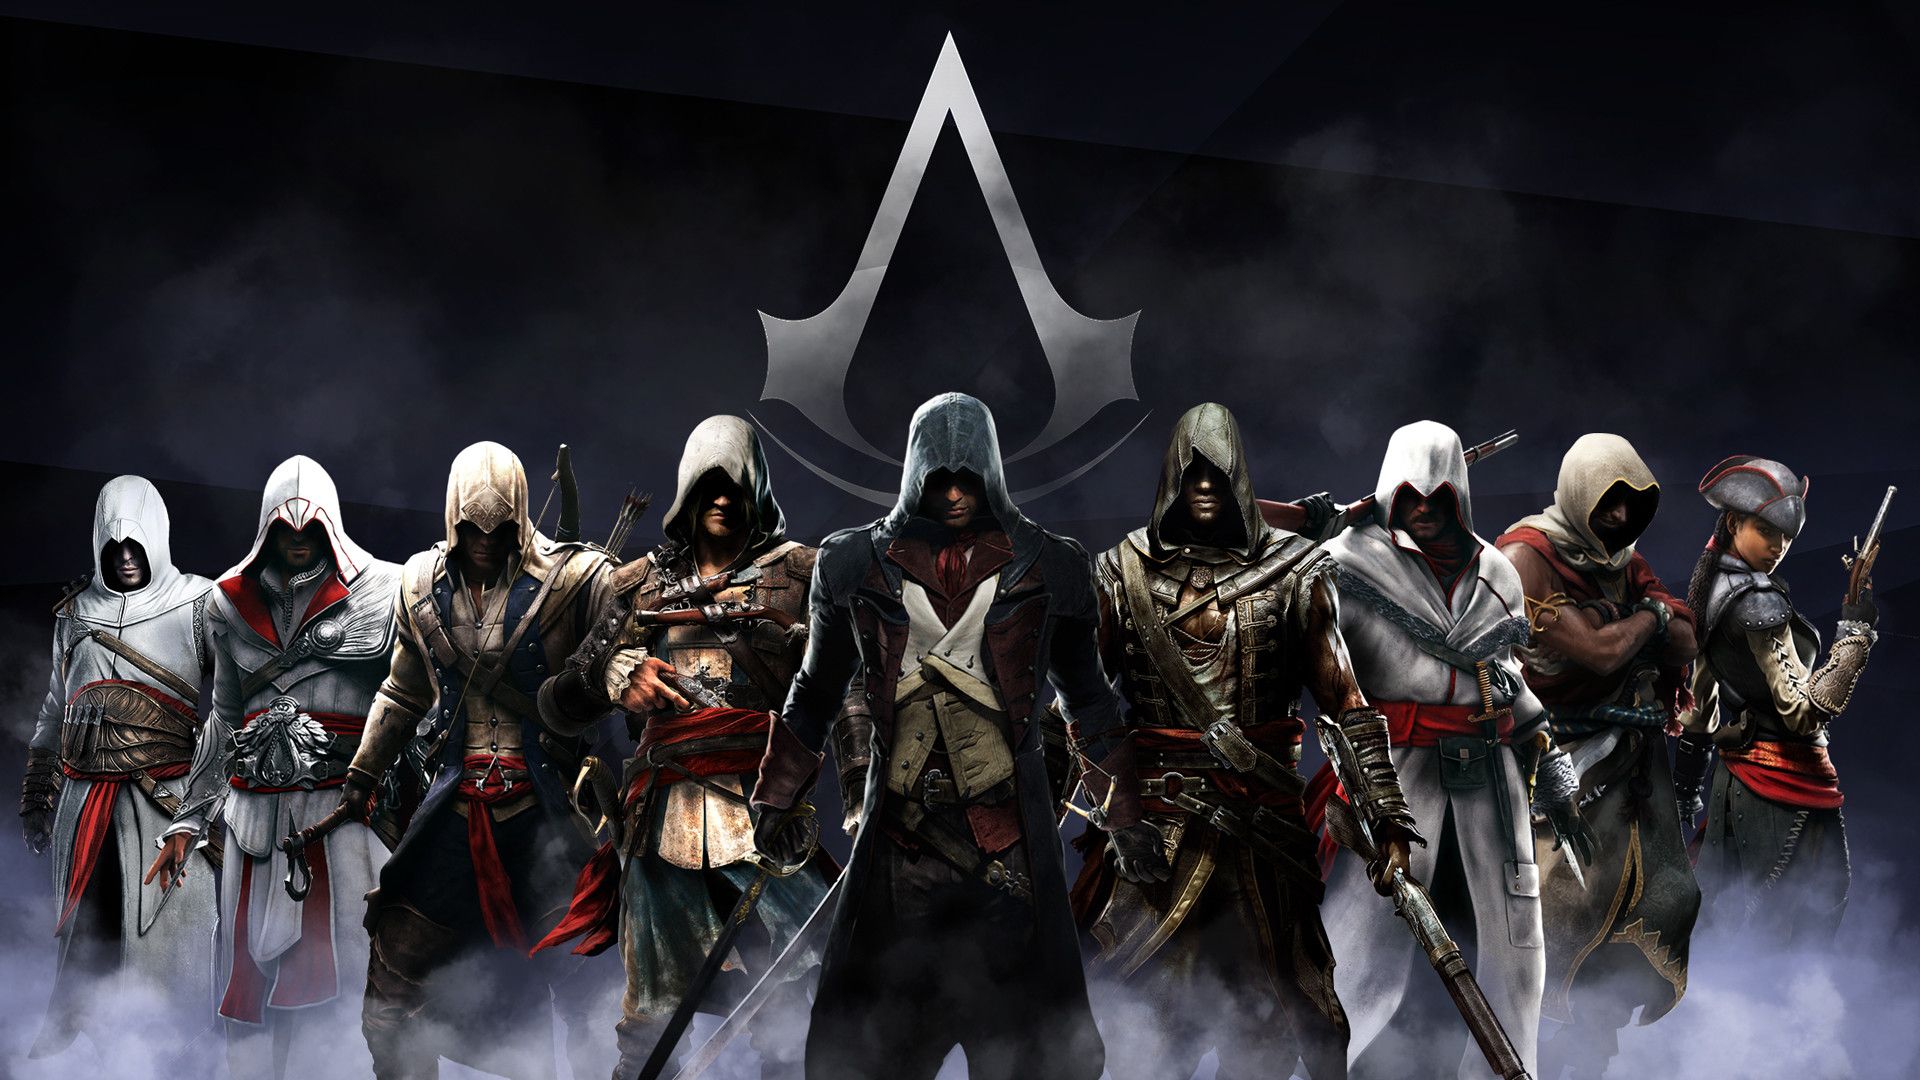 download Assassin’s Creed free